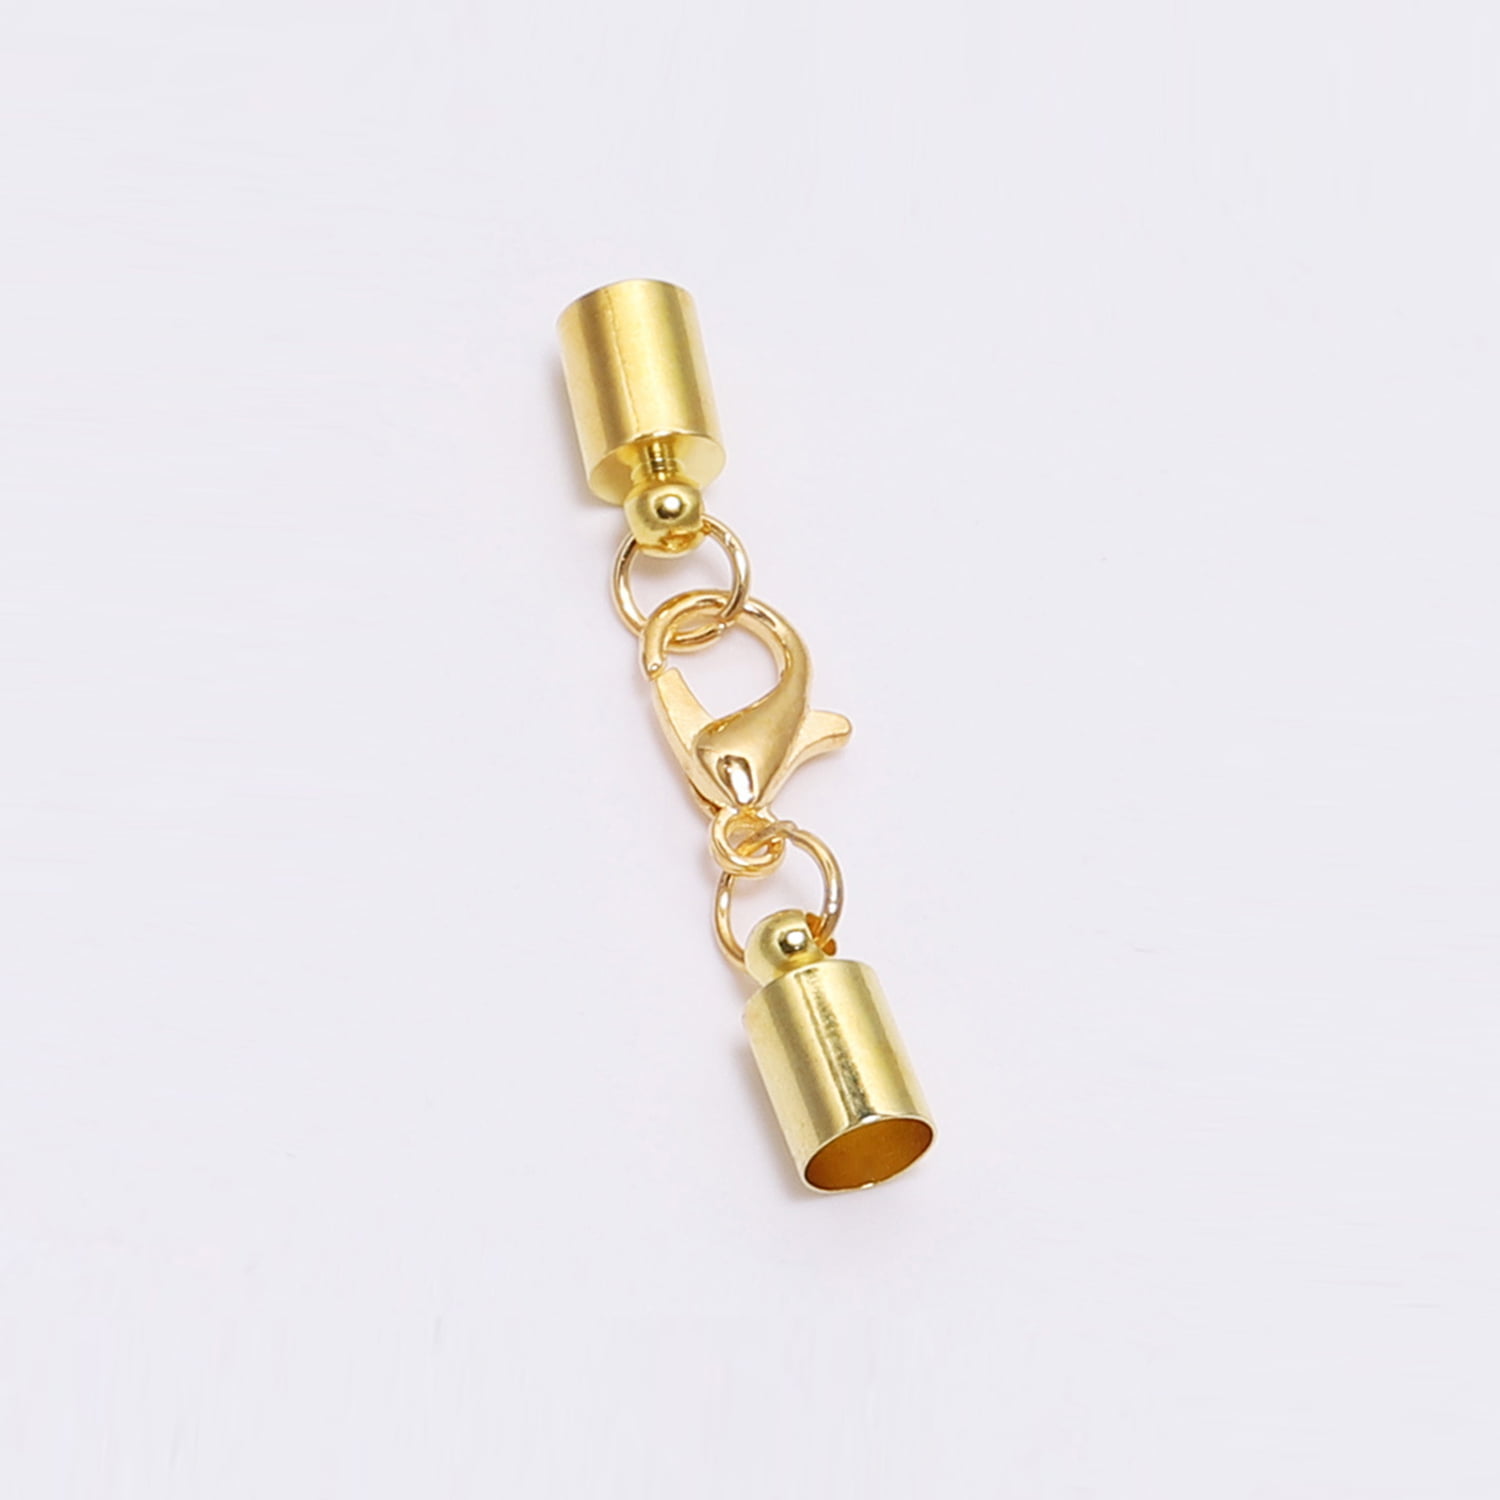 10pcslot Gold Silver Strong Magnetic Clasps 3 4 5 6 8 10 mm Leather Cord Bracelet Connectors For DIY Jewelry Making Accessories